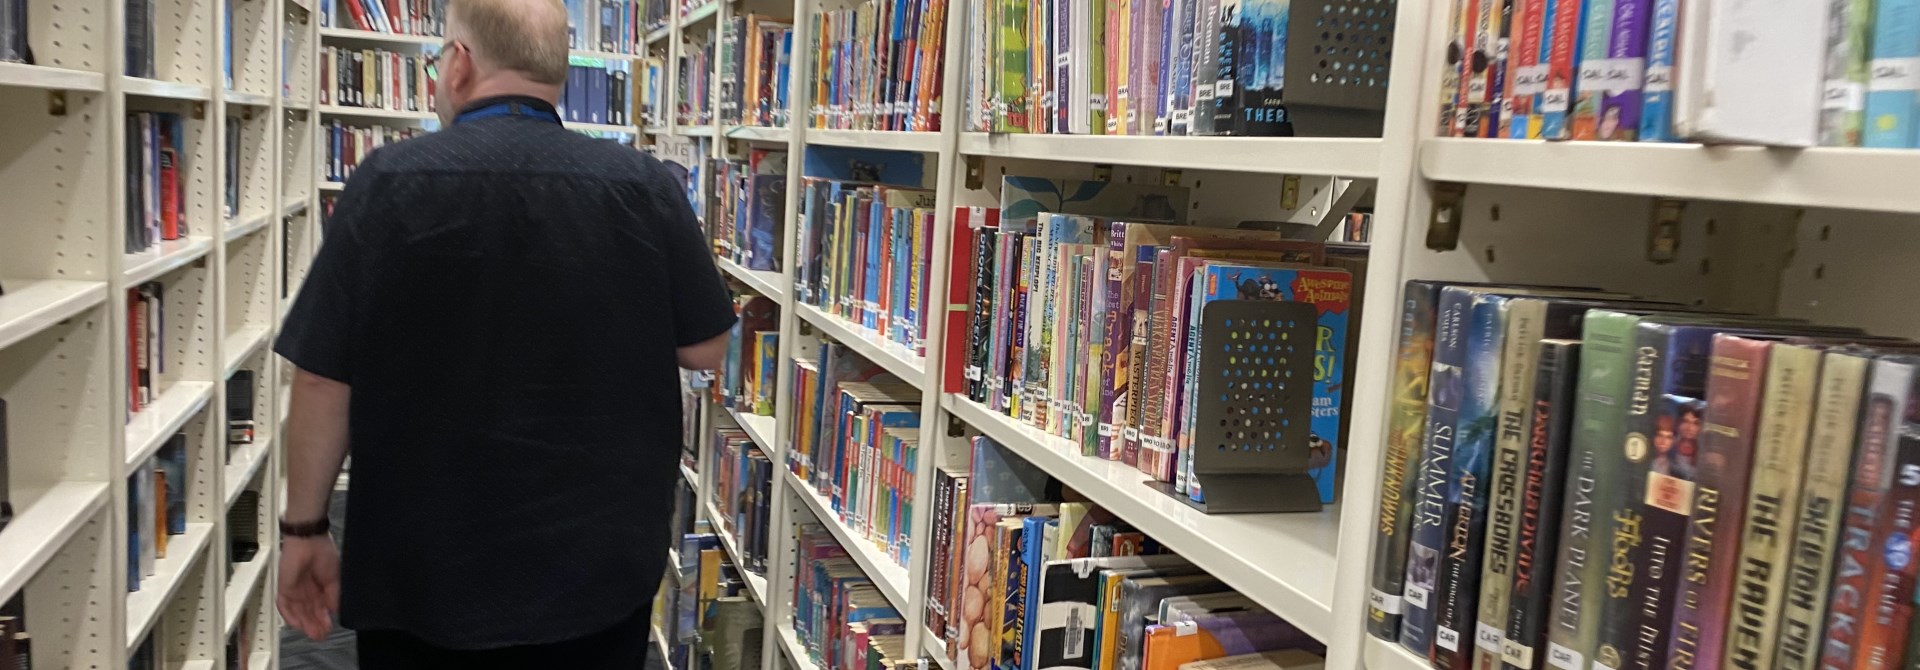 The back of a large-framed man with dark coloured clothing walking through a library isle of shelving filled with books on either side.